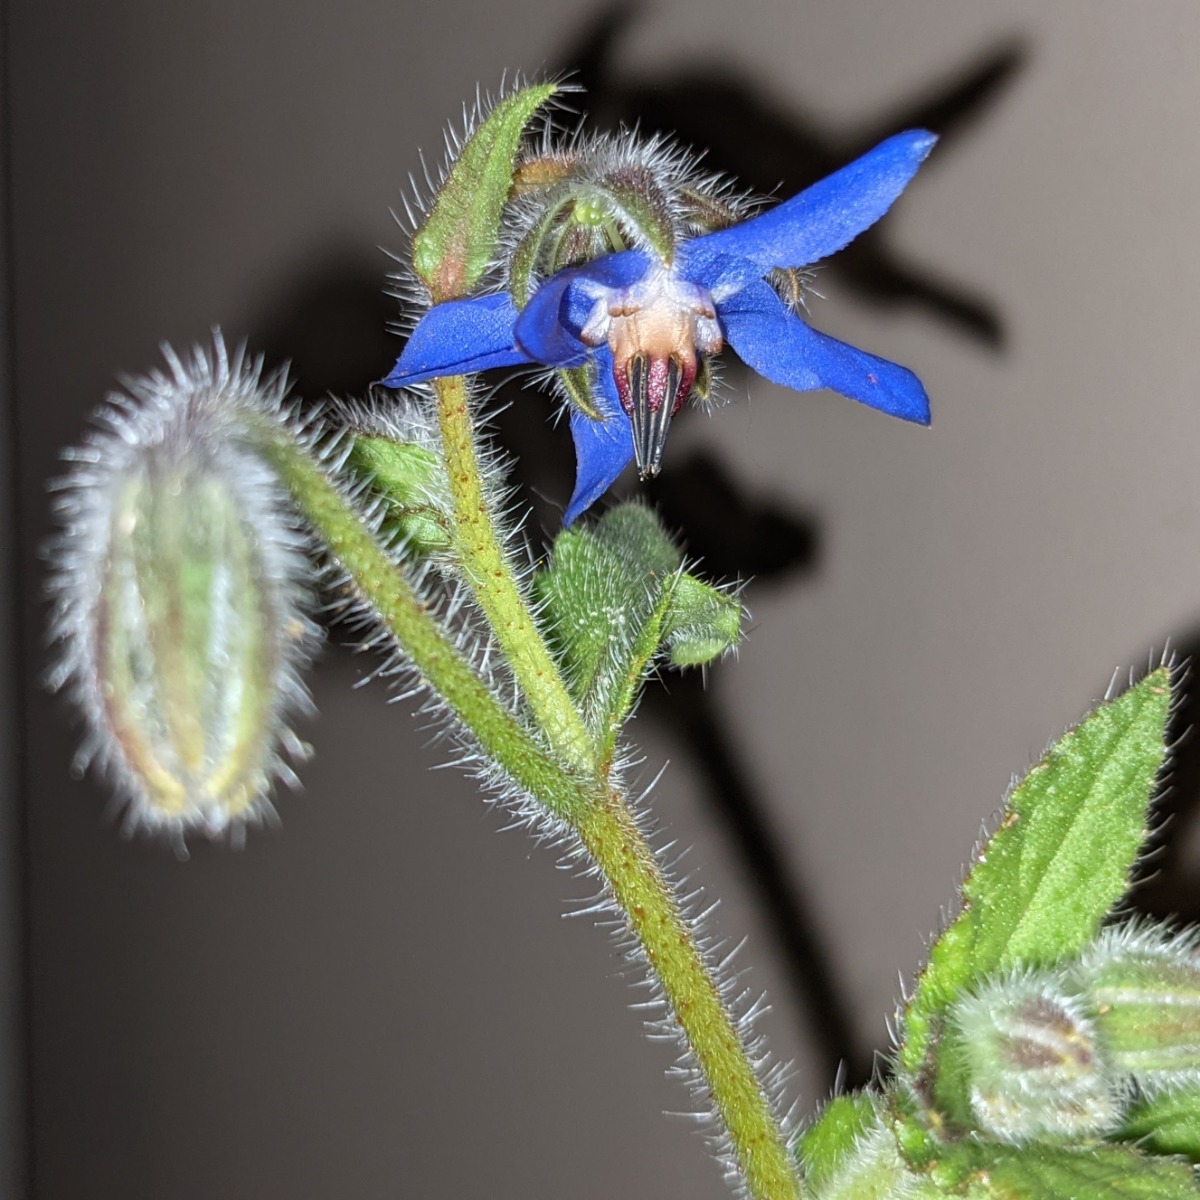 Growing Borage - this borage plant has one bloom almost ready to open and one that's almost spent.